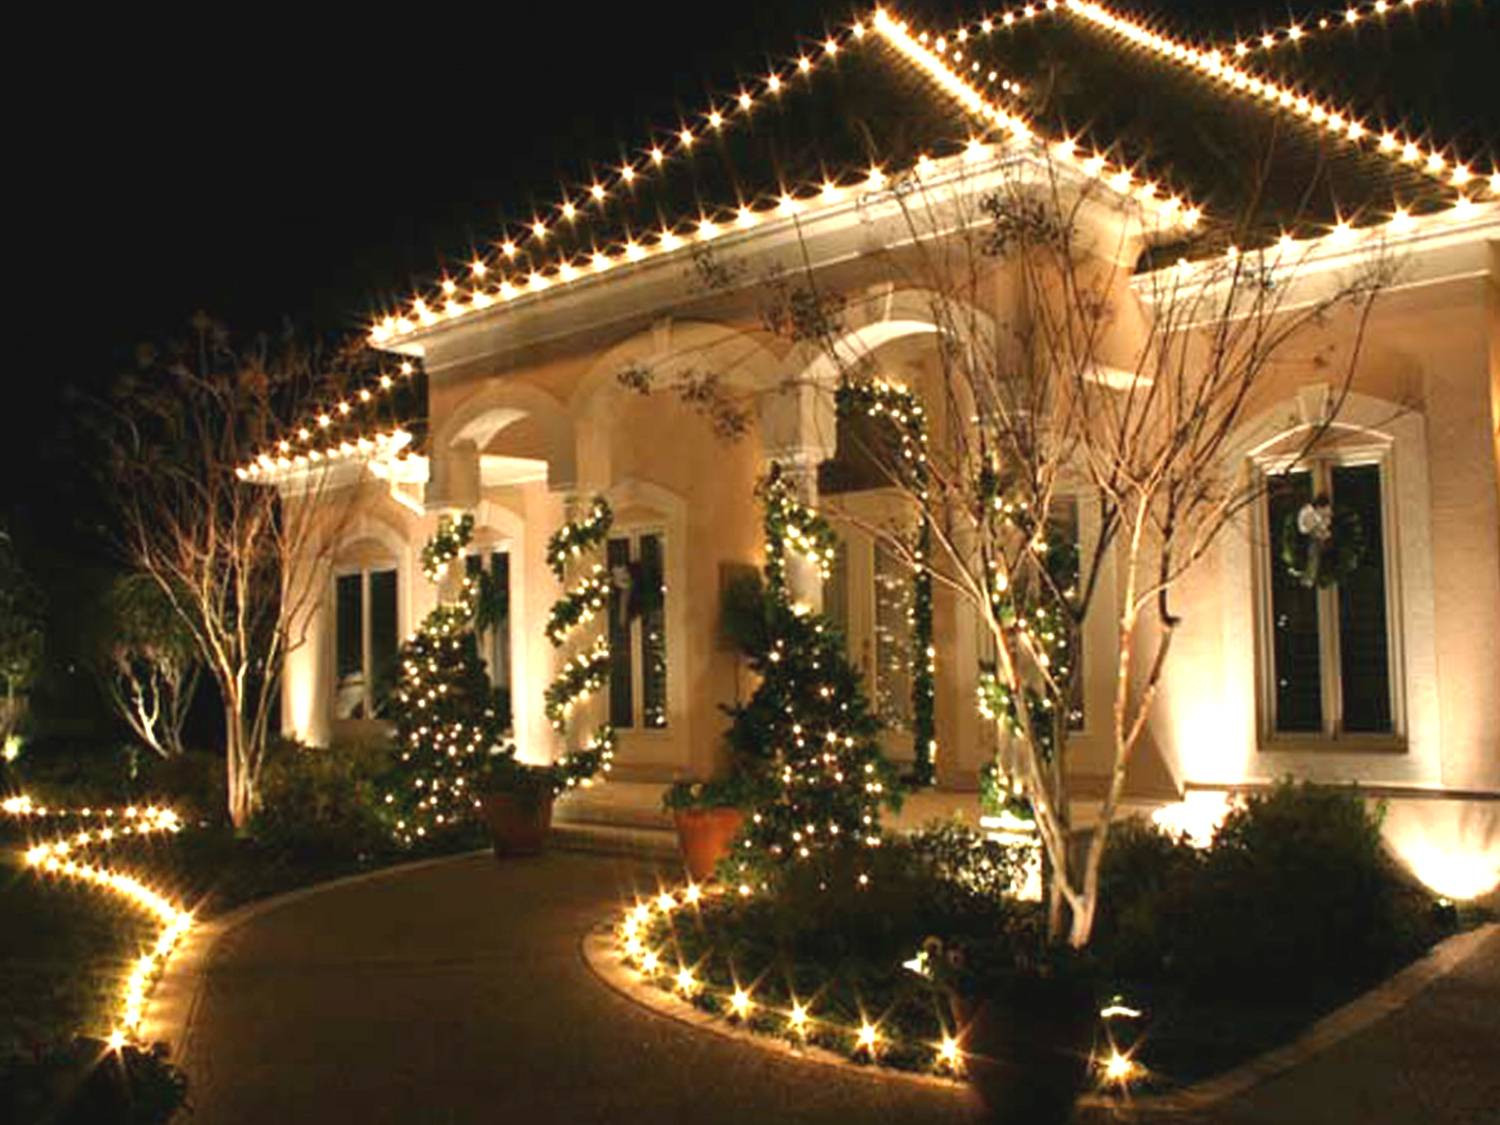 Christmas Spotlights Outdoor
 Swingle s Best Places to View 2013 Christmas Lights